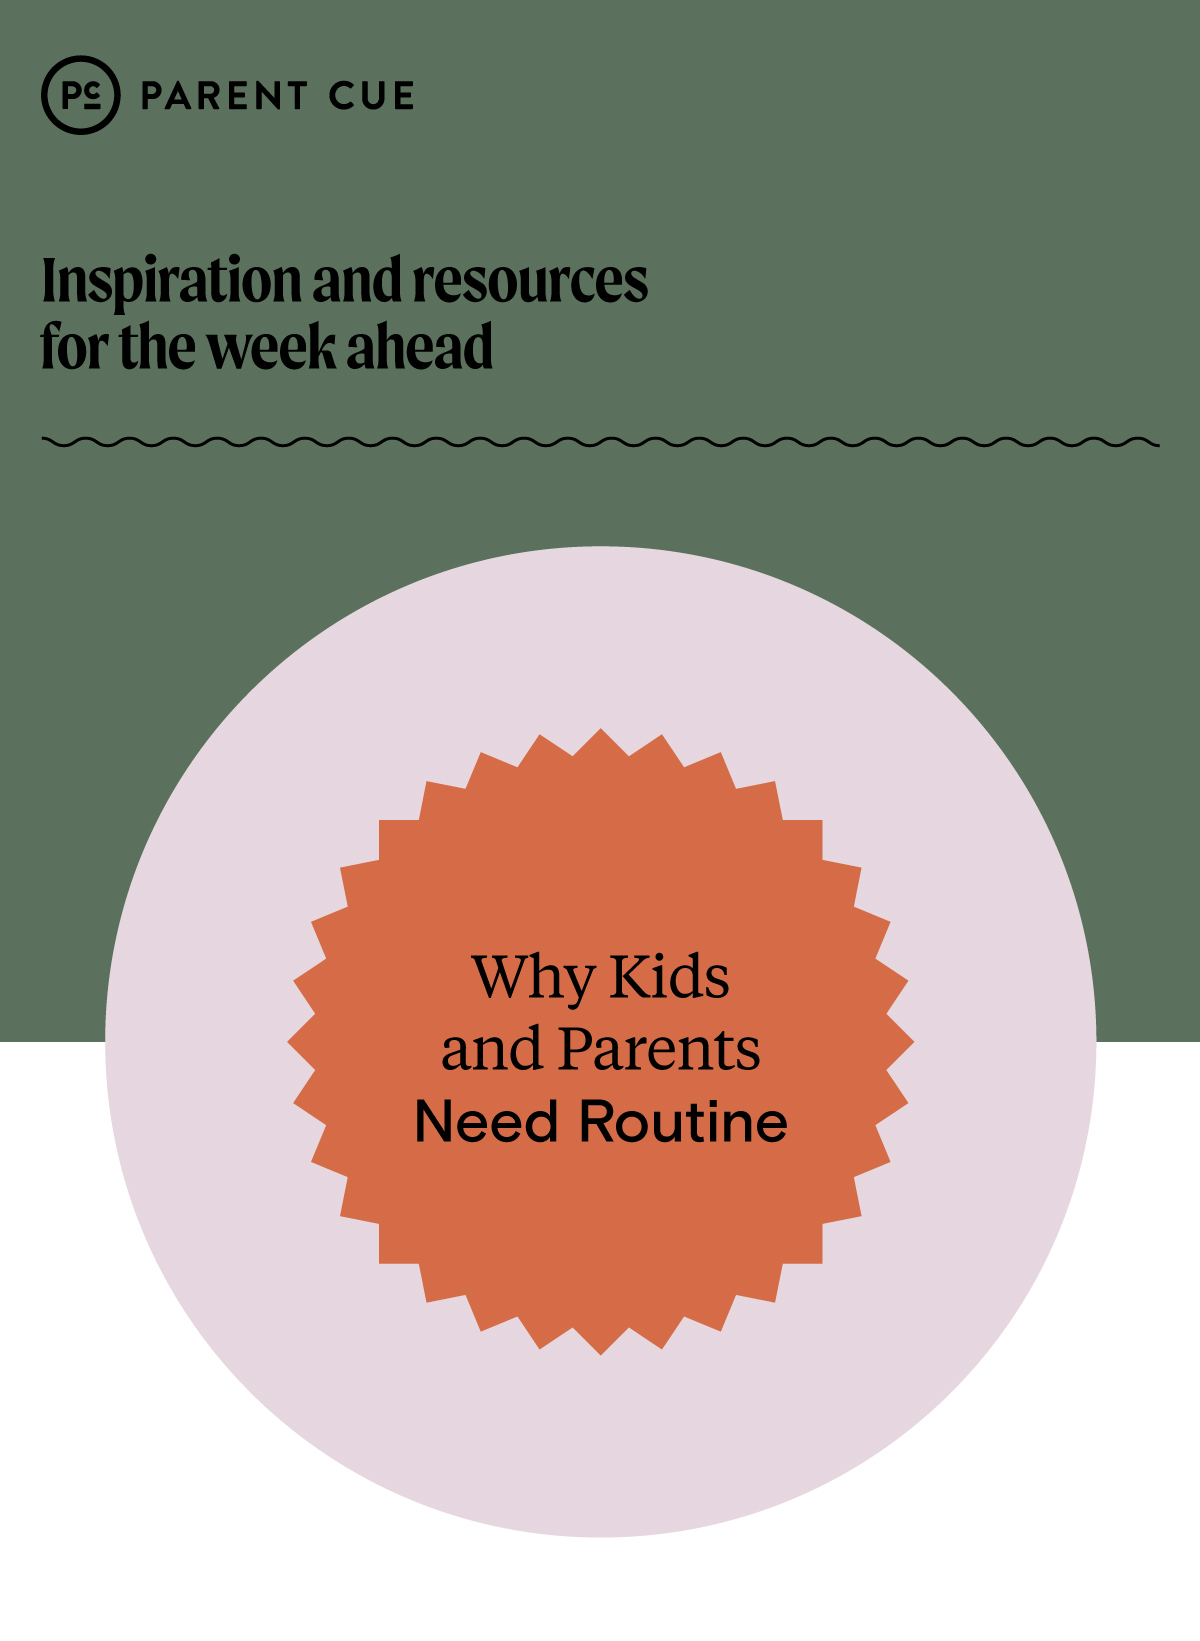 Why Kids and Parents Need Routine